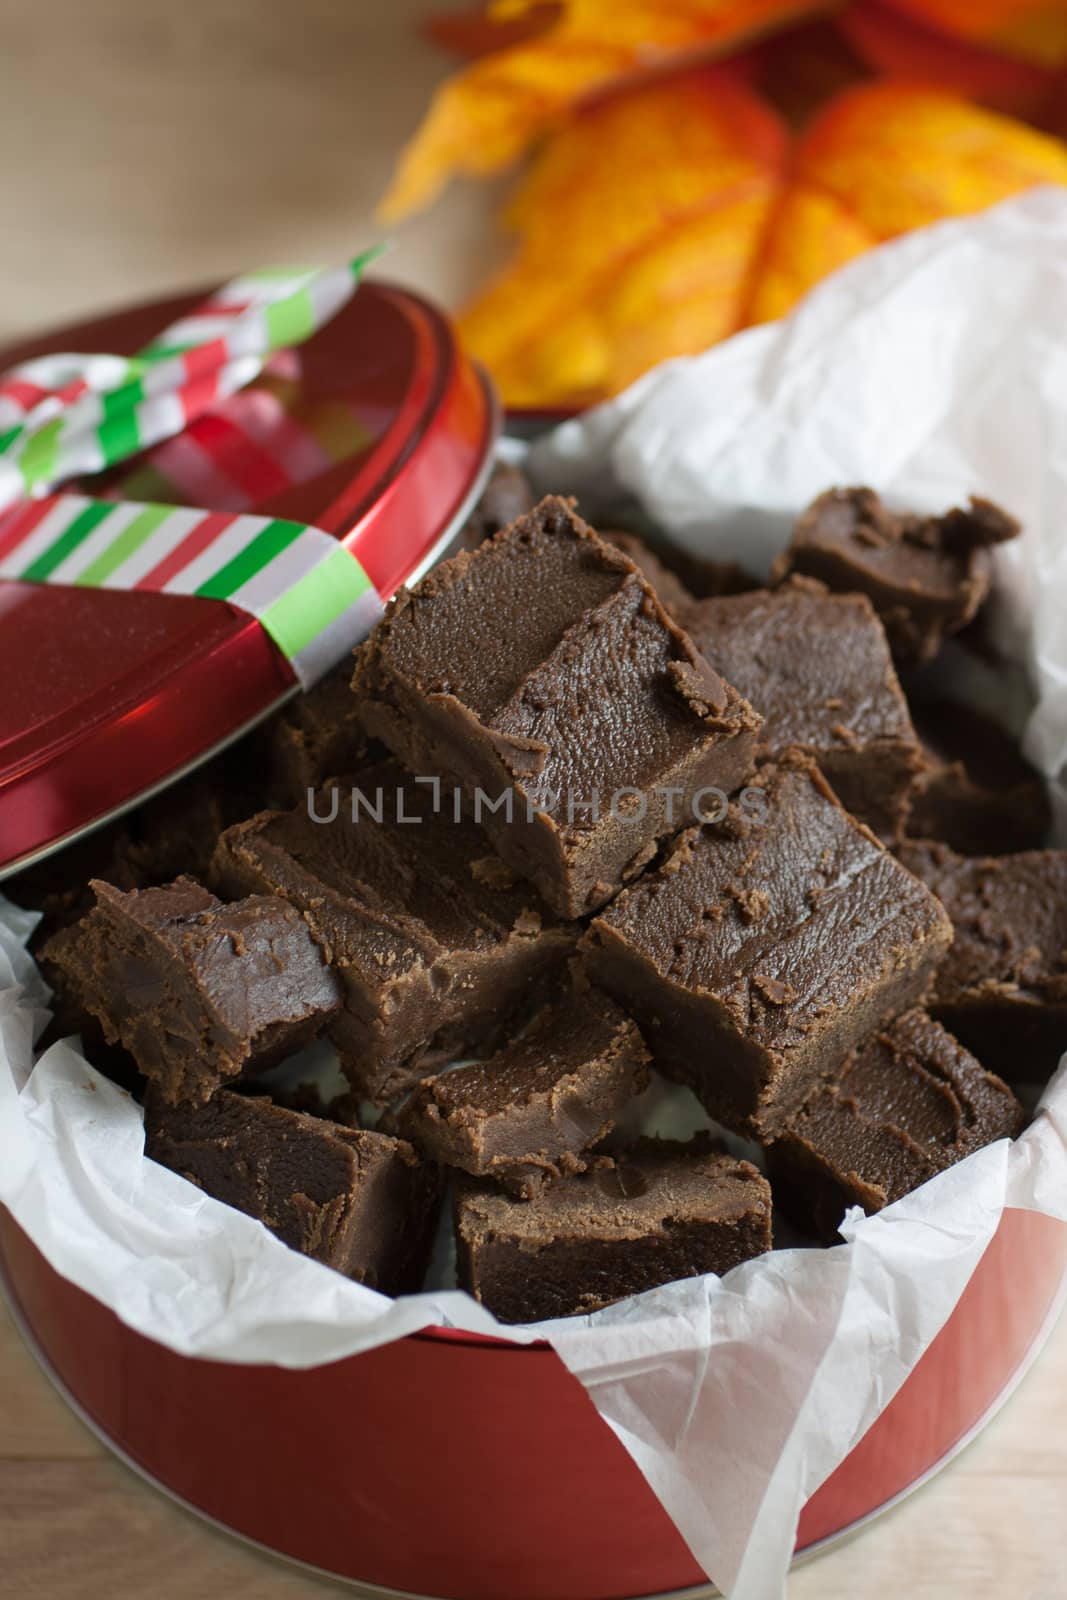 Handmade fudge packed in a holiday gift tin.